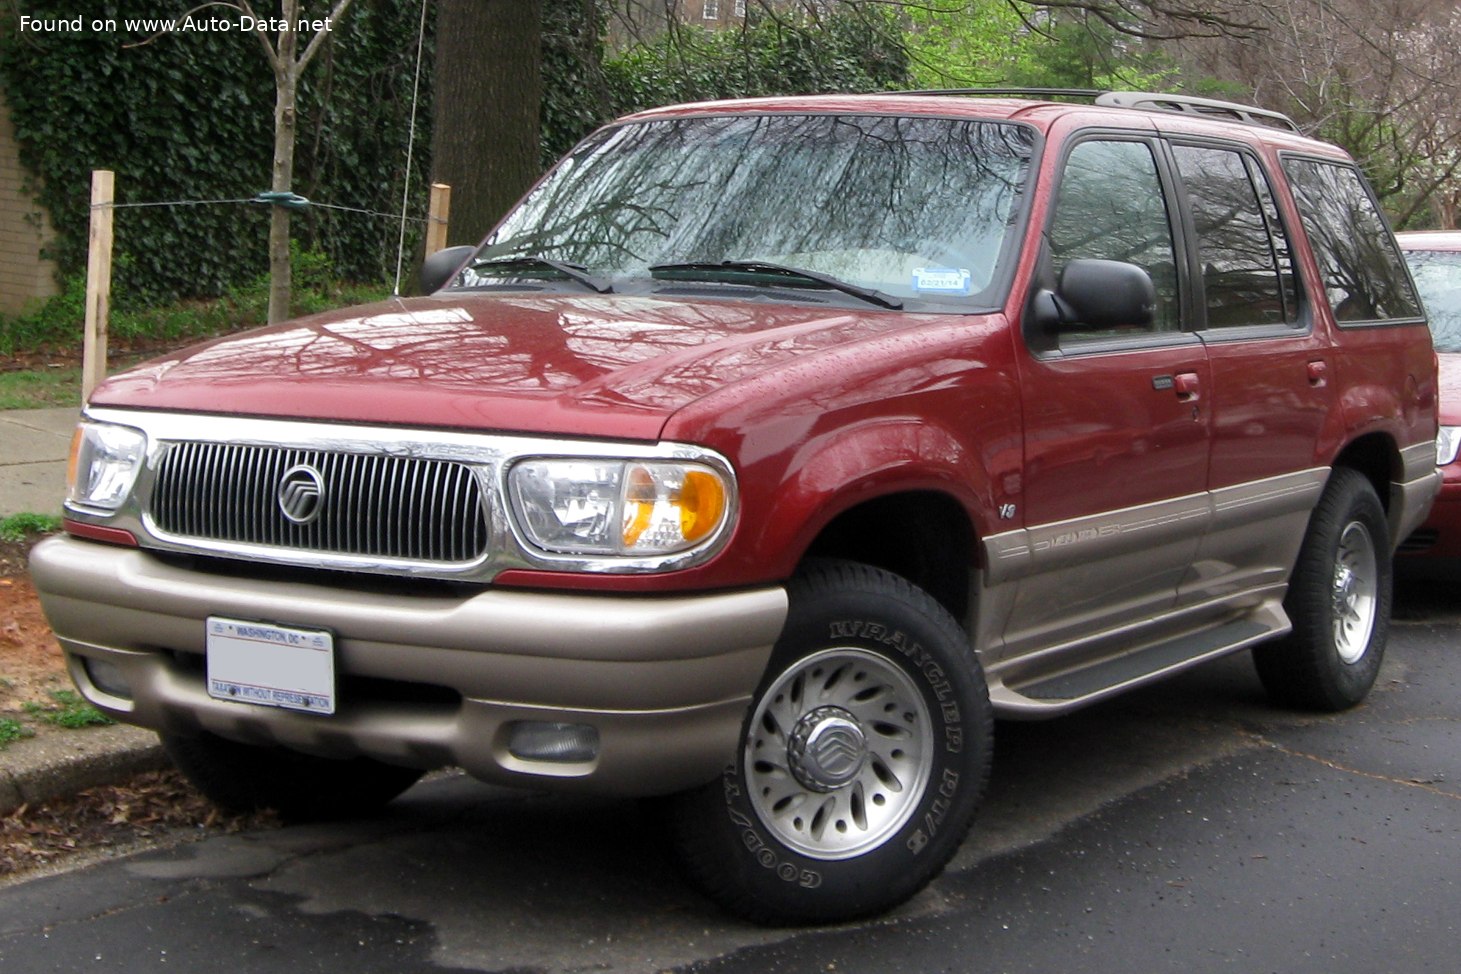 2001 Mercury Mountaineer I 4.6 i V8 AWD (242 Hp) | Technical specs, data,  fuel consumption, Dimensions